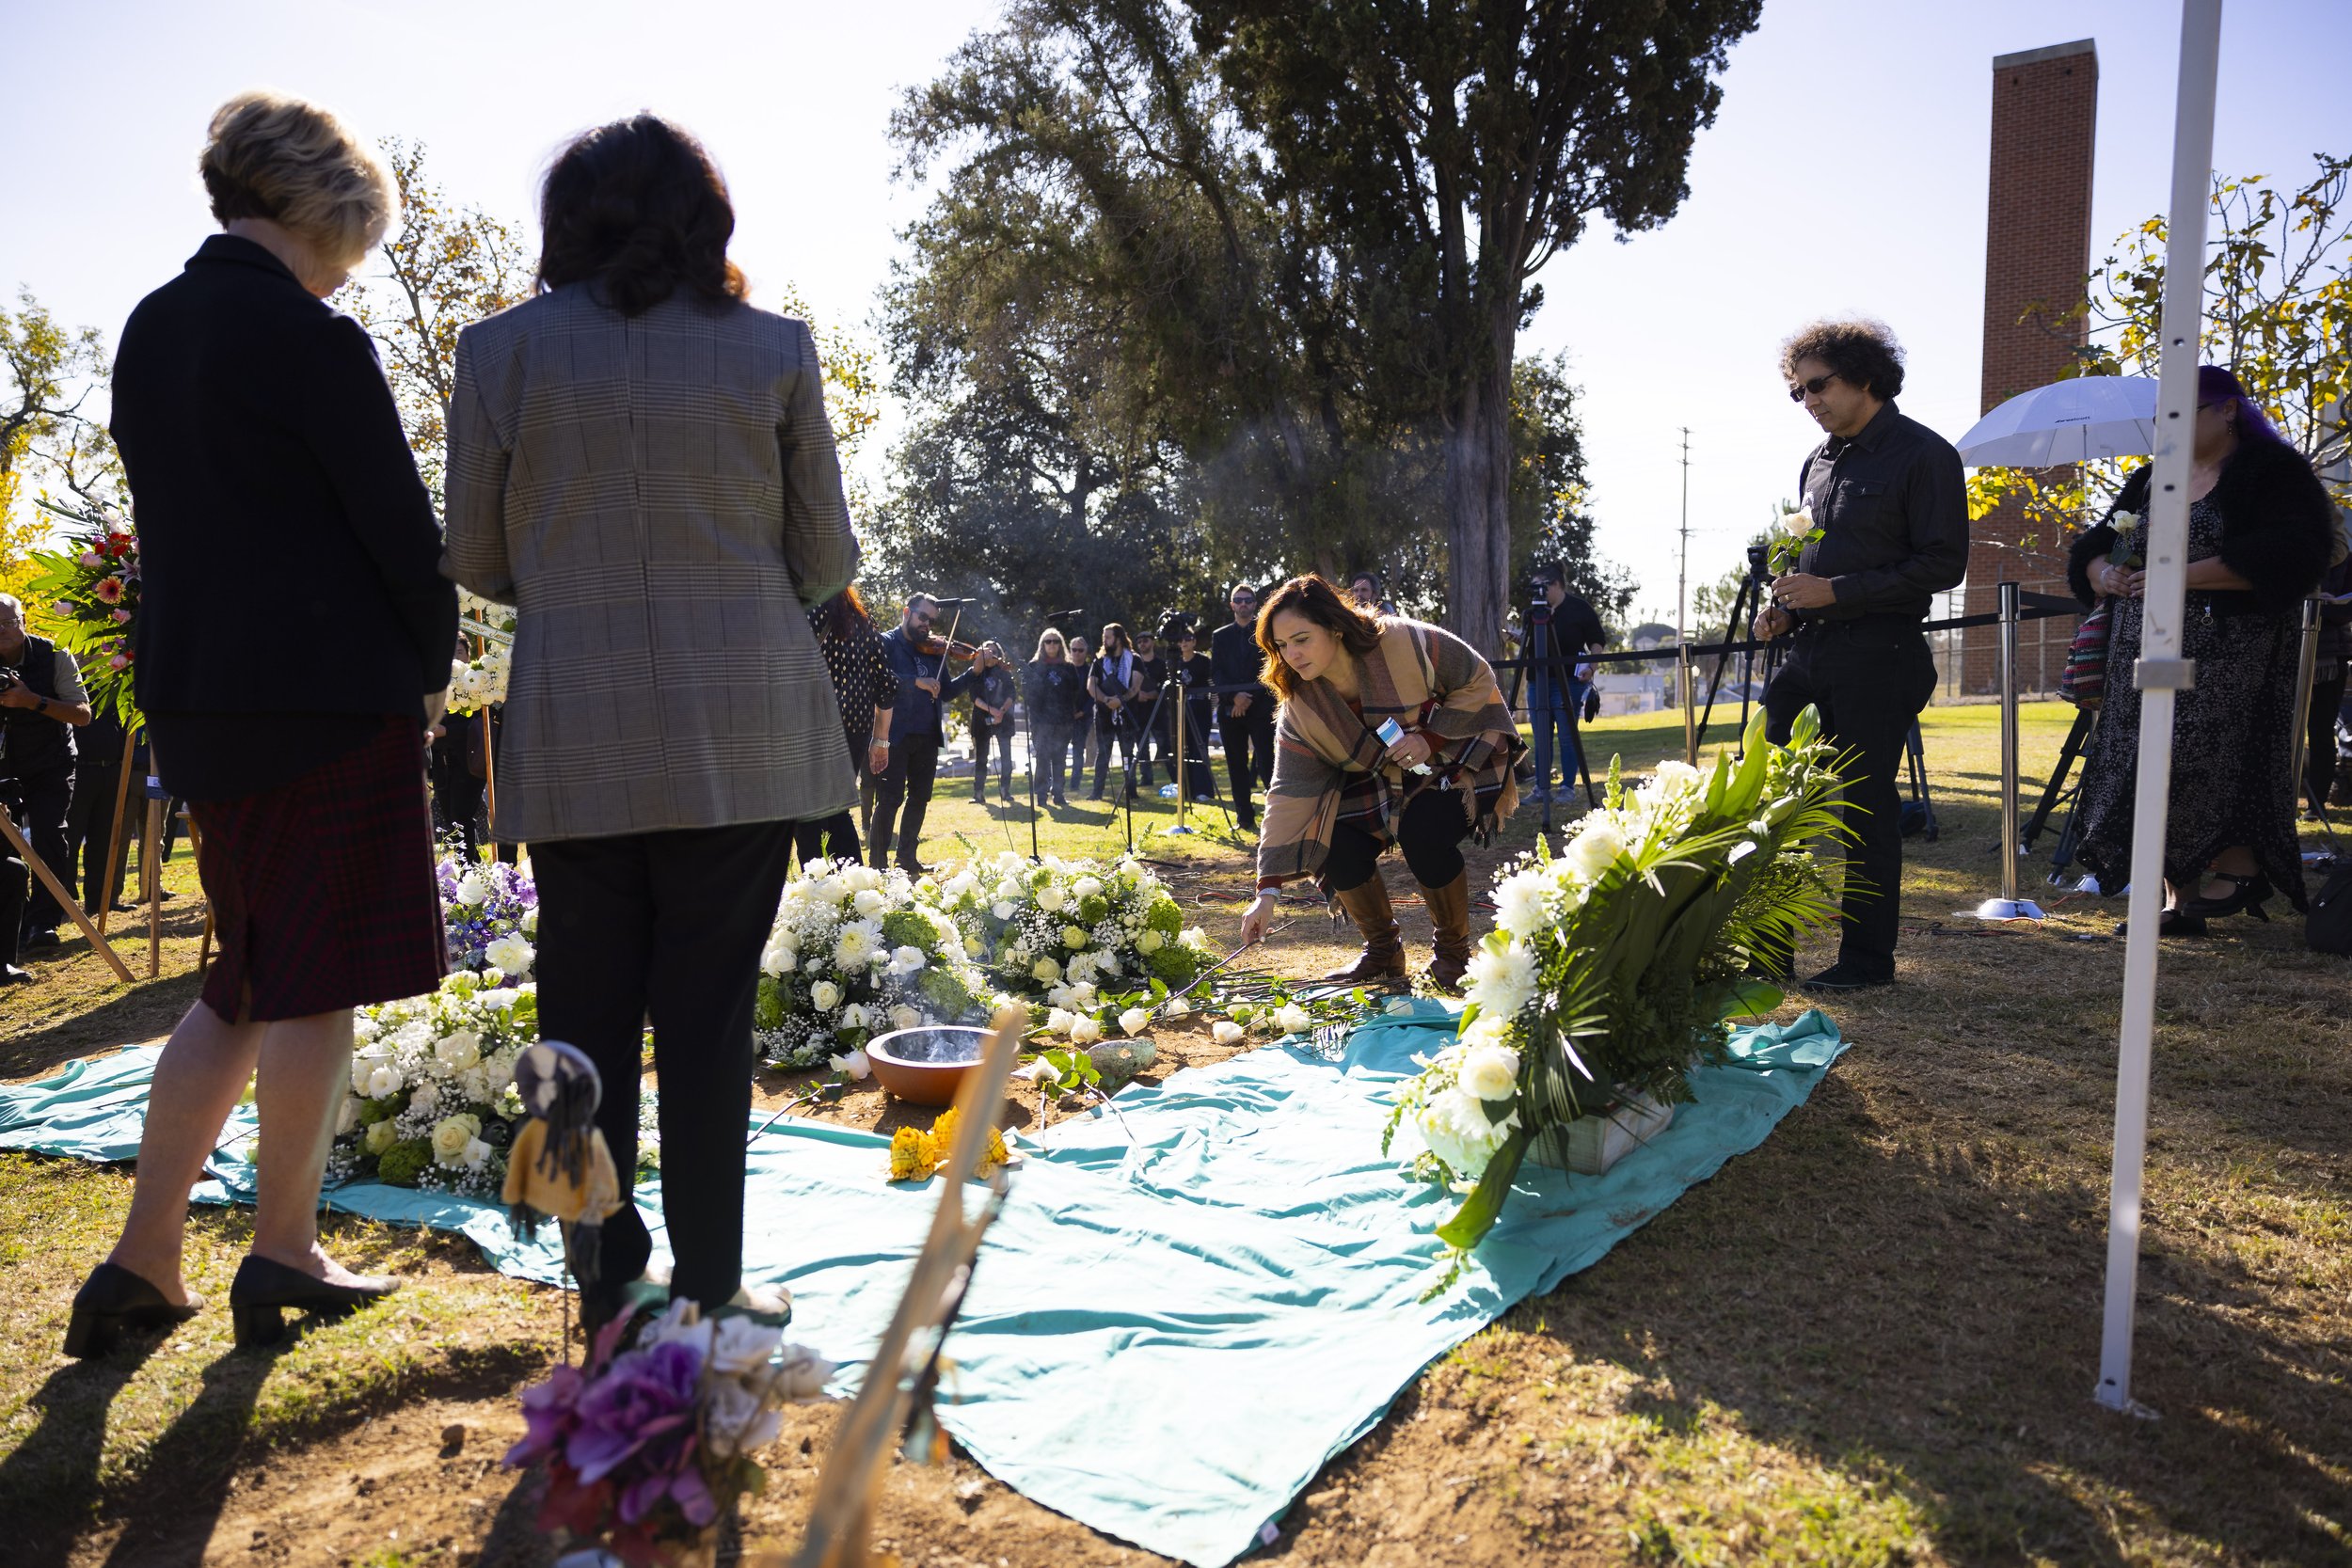  Guests attending the LA County Ceremony of the Unclaimed Dead place white roses on the grave marking the 1,937 individuals who died in 2020 and either did not have next of kin, or were not claimed by their next of kin at the LA County Cemetery, in L